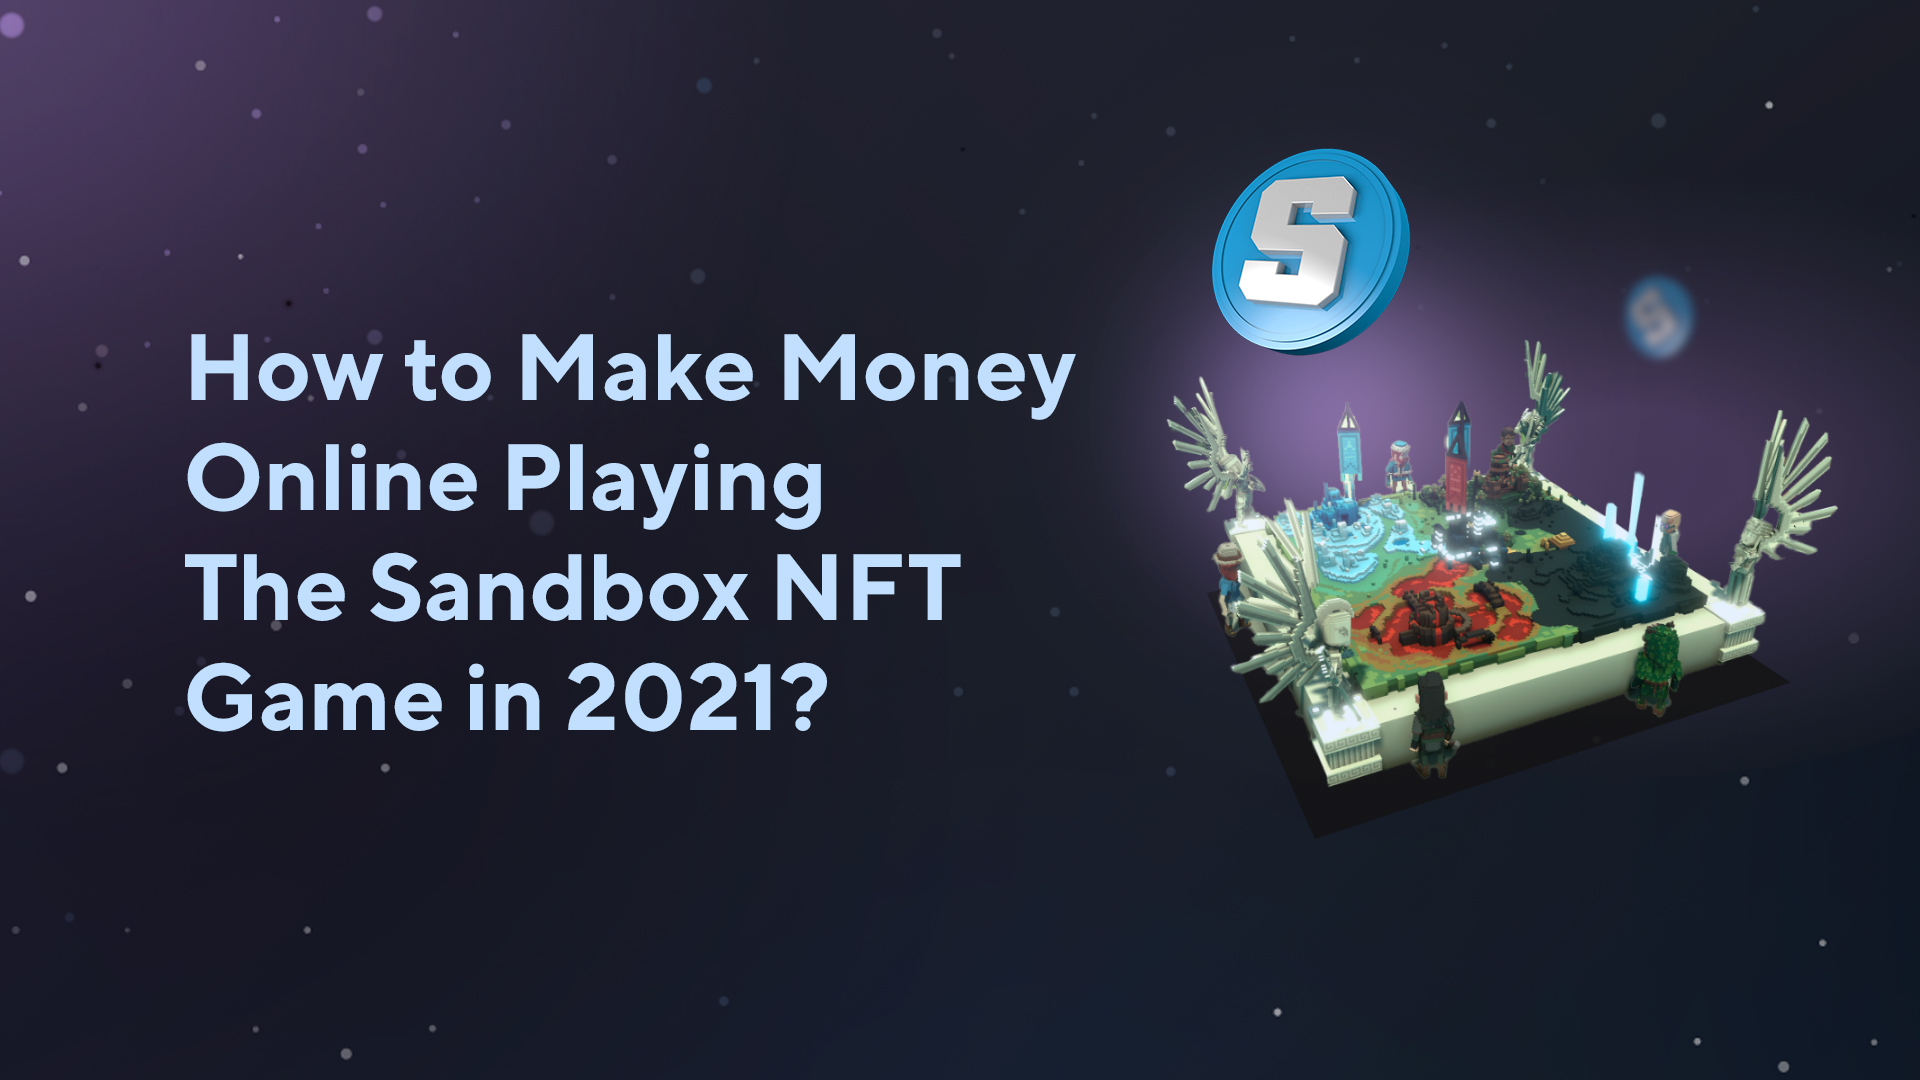 How to Make Money Online Playing The Sandbox NFT Game in 2021?